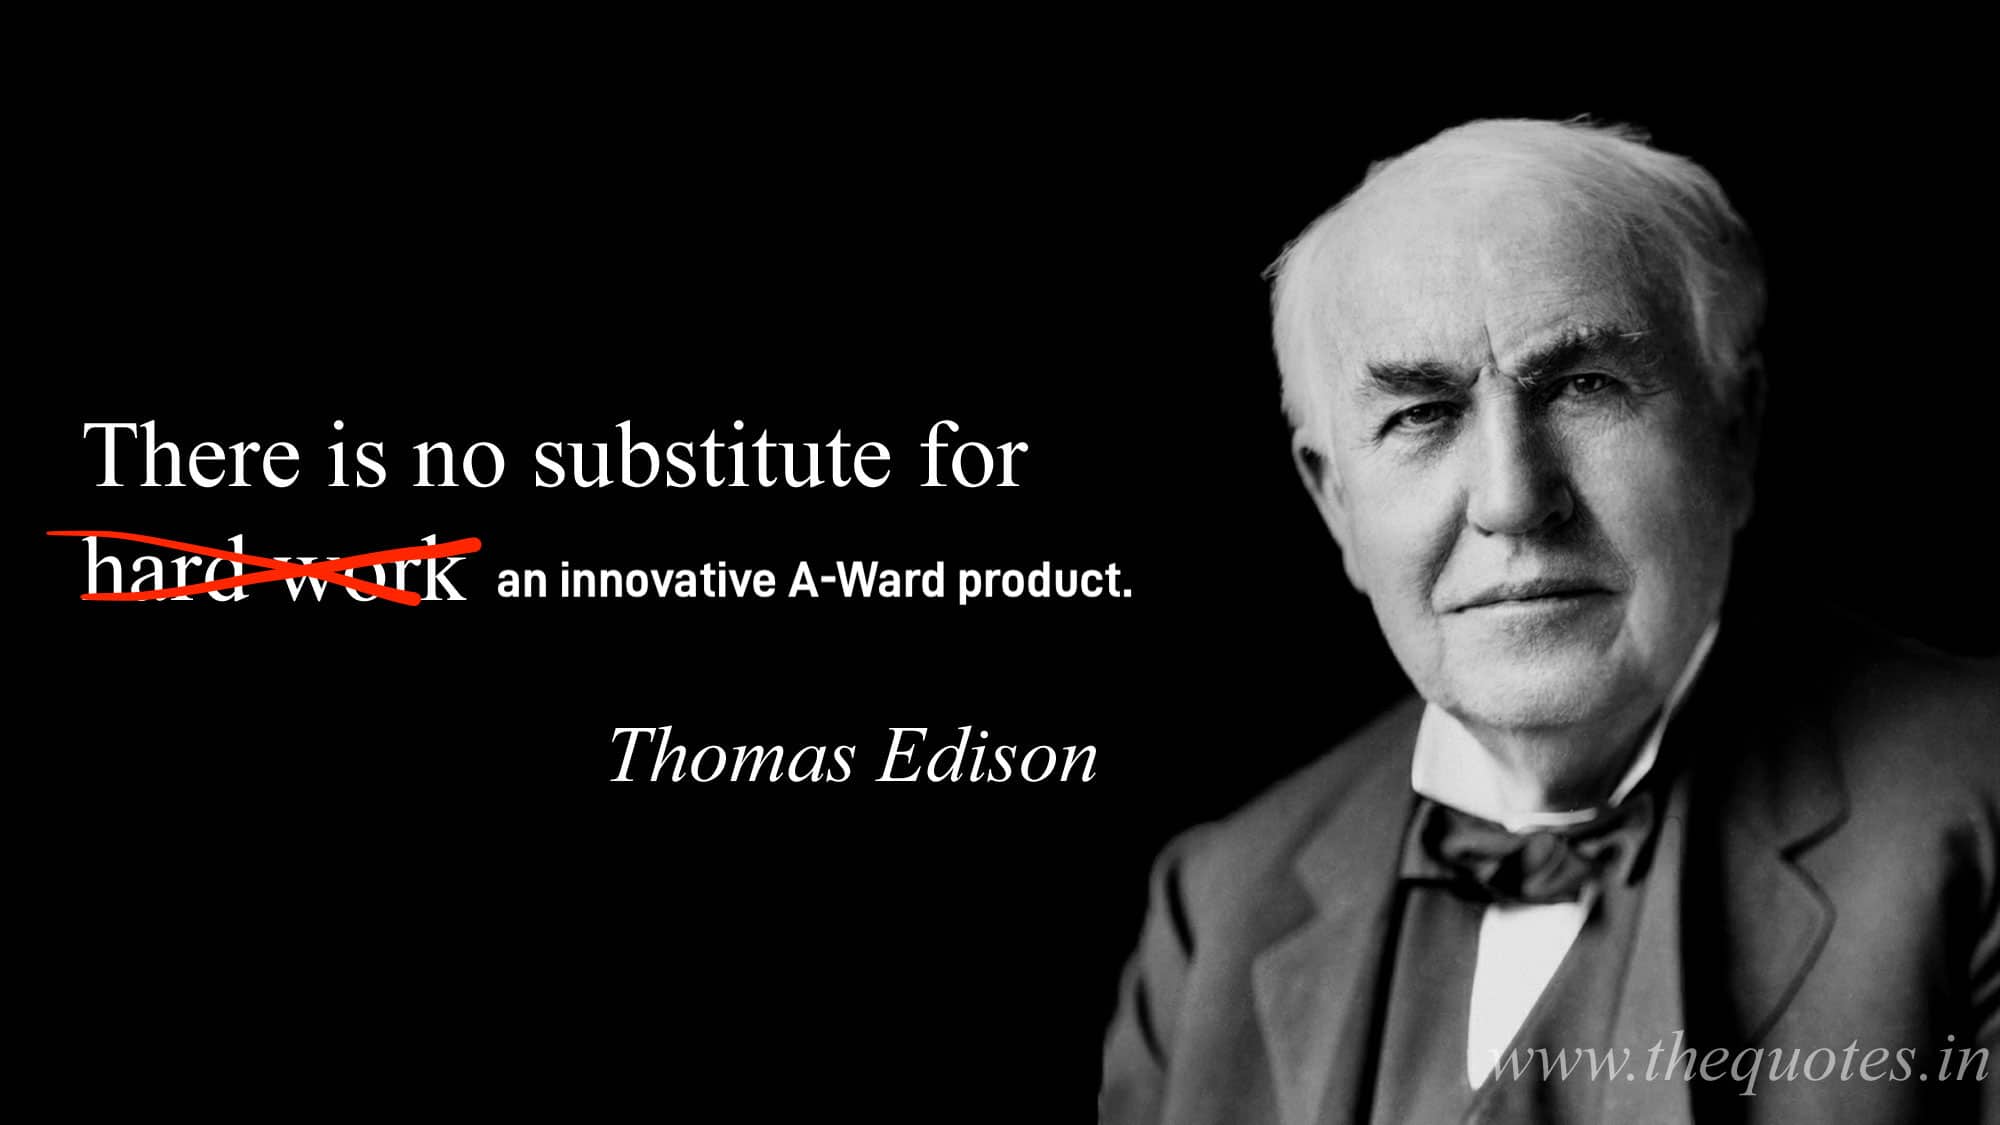 7354567 full good senior quotes about hard work there is no substitute for hard work thomas edison quotes1